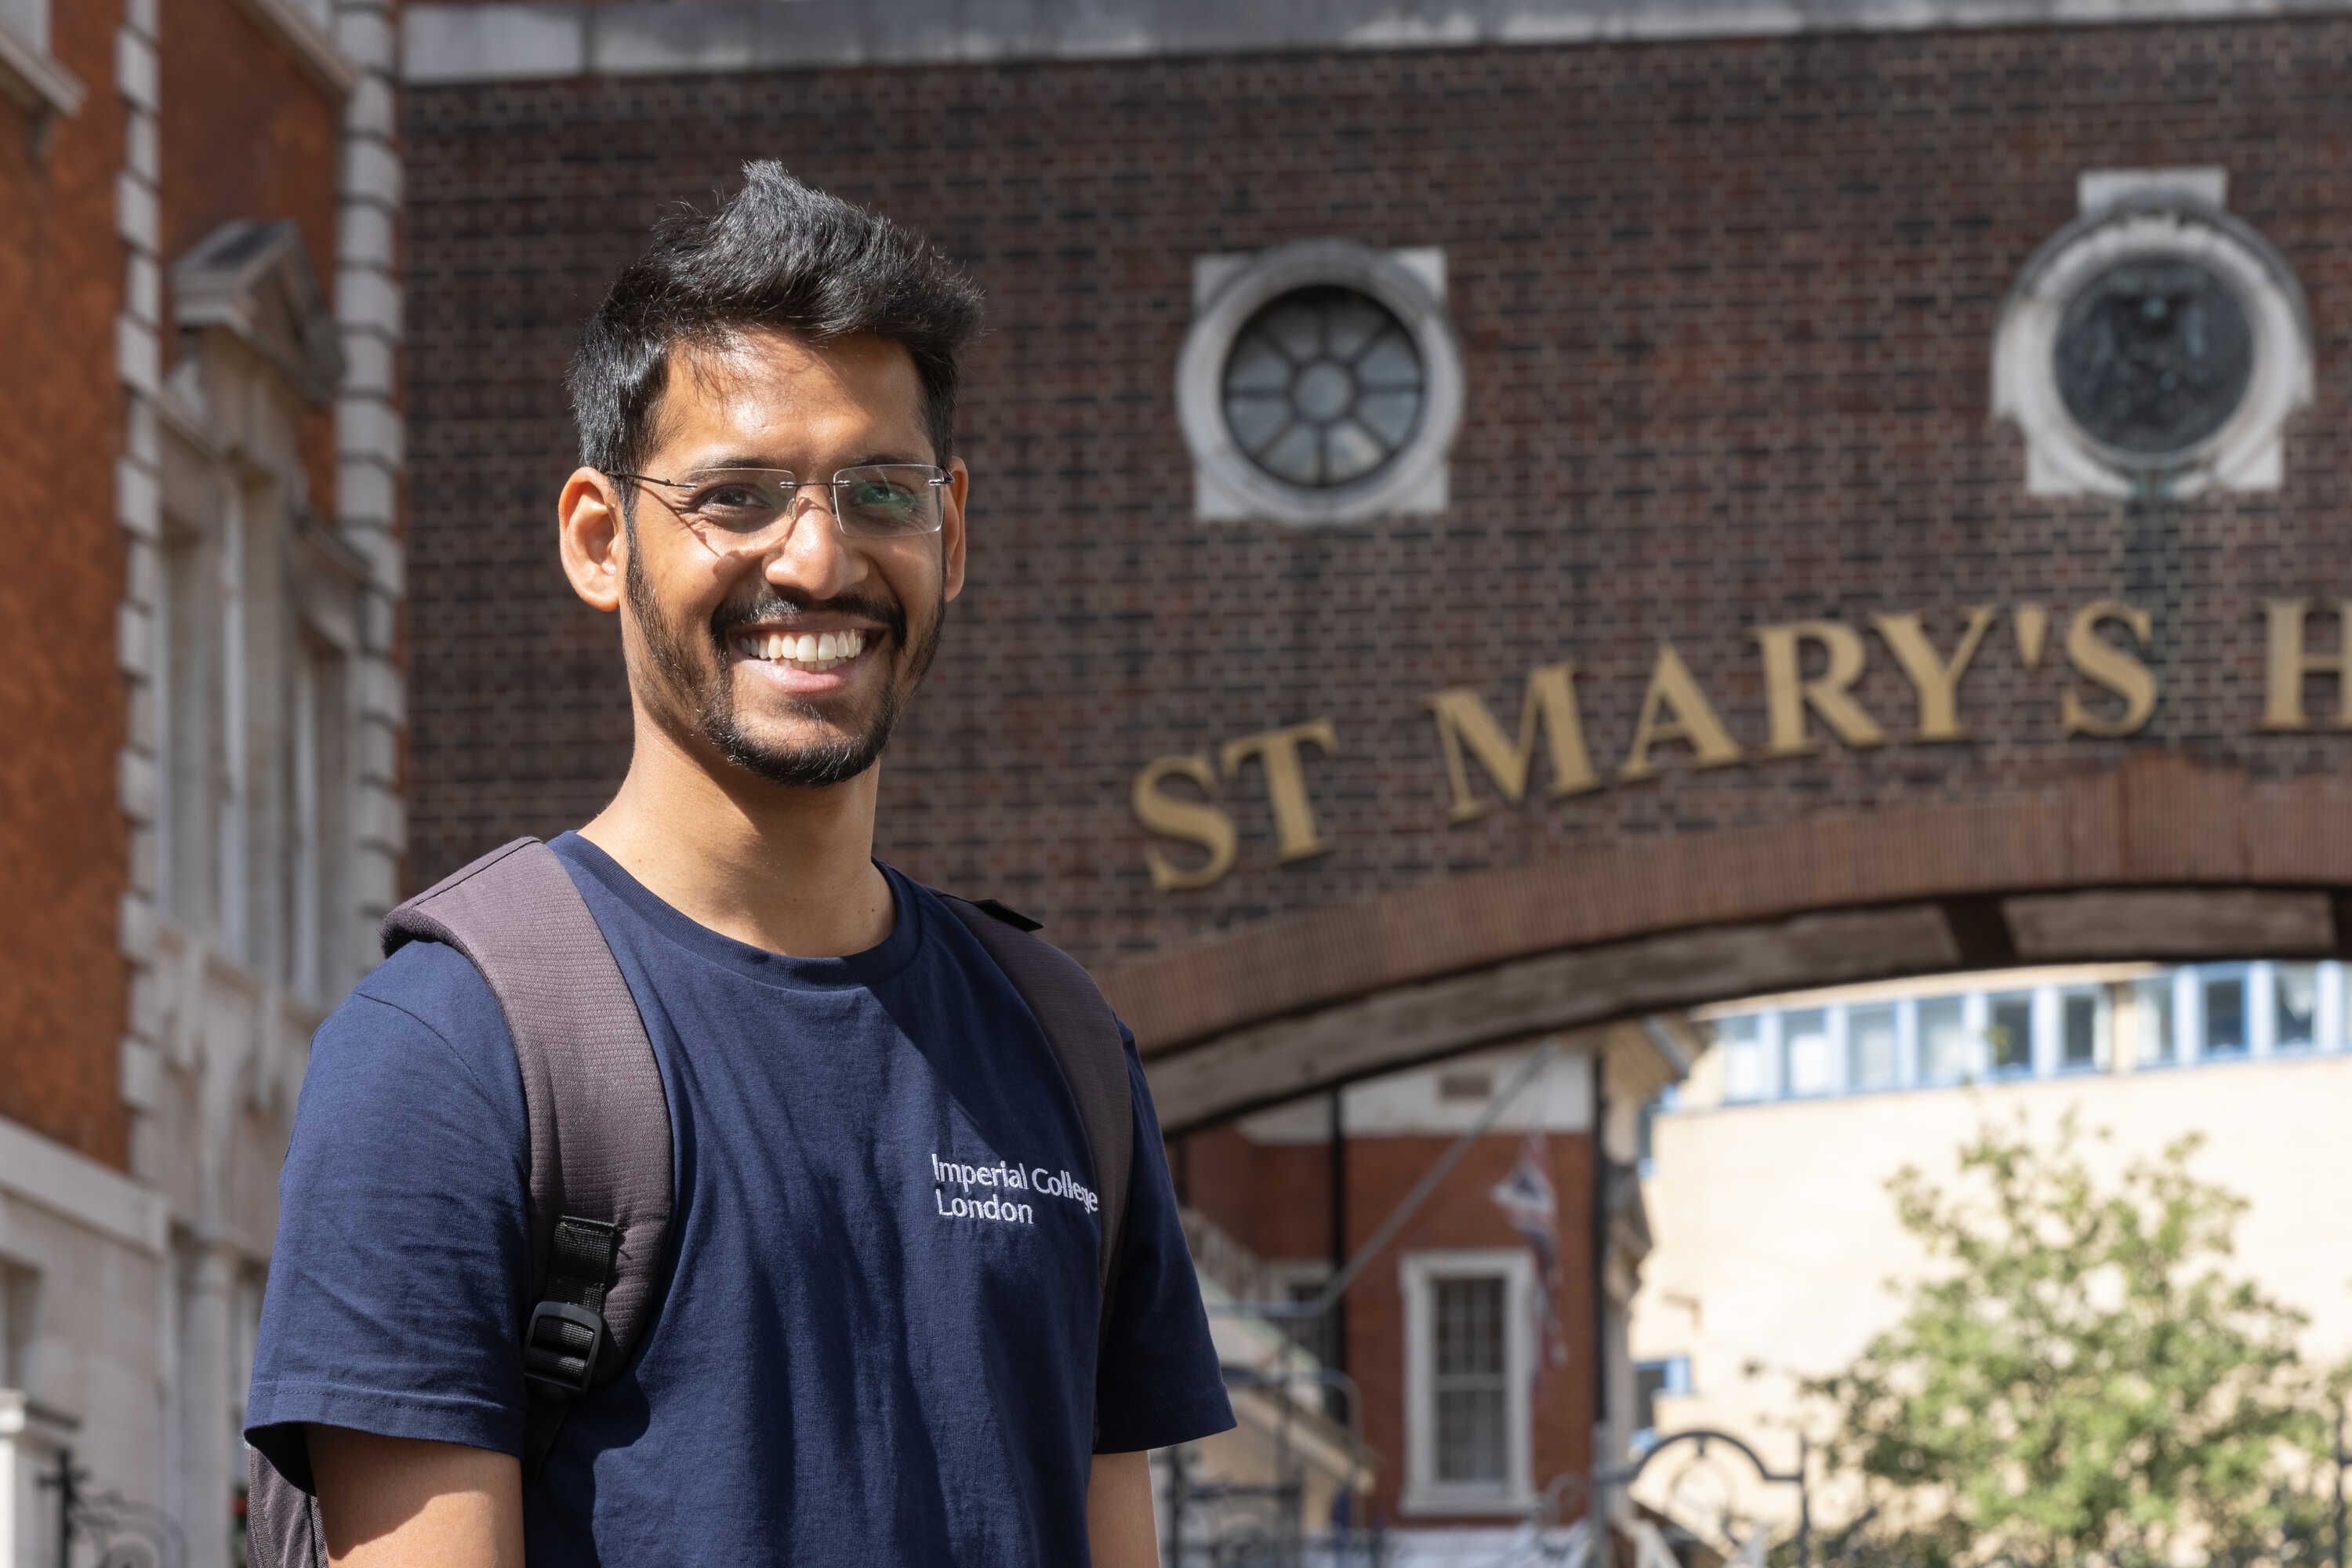 Researcher standing outside St Mary's campus in London